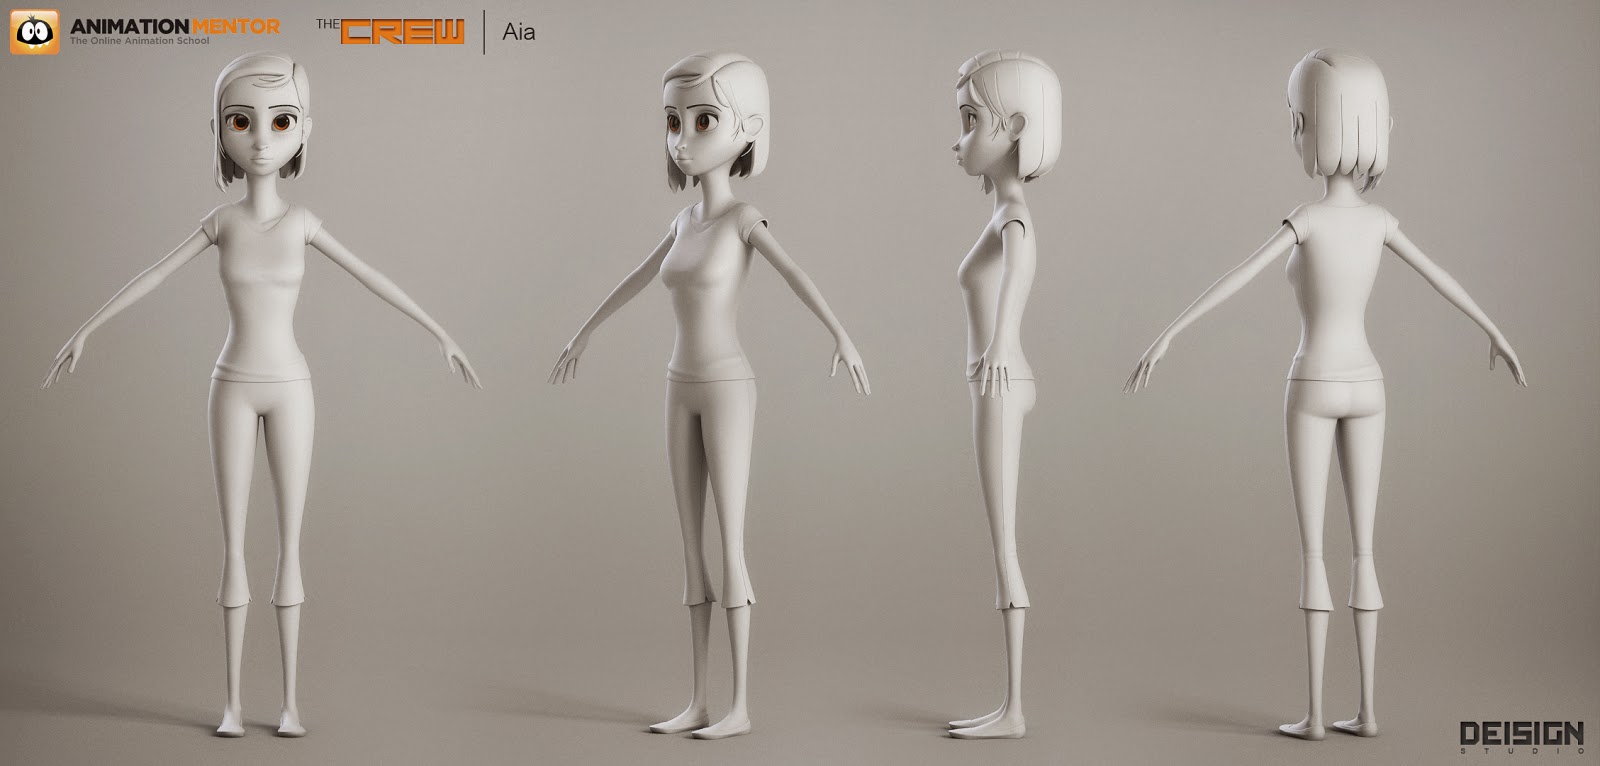 Animation Mentor CREW Characters | Creating Aia